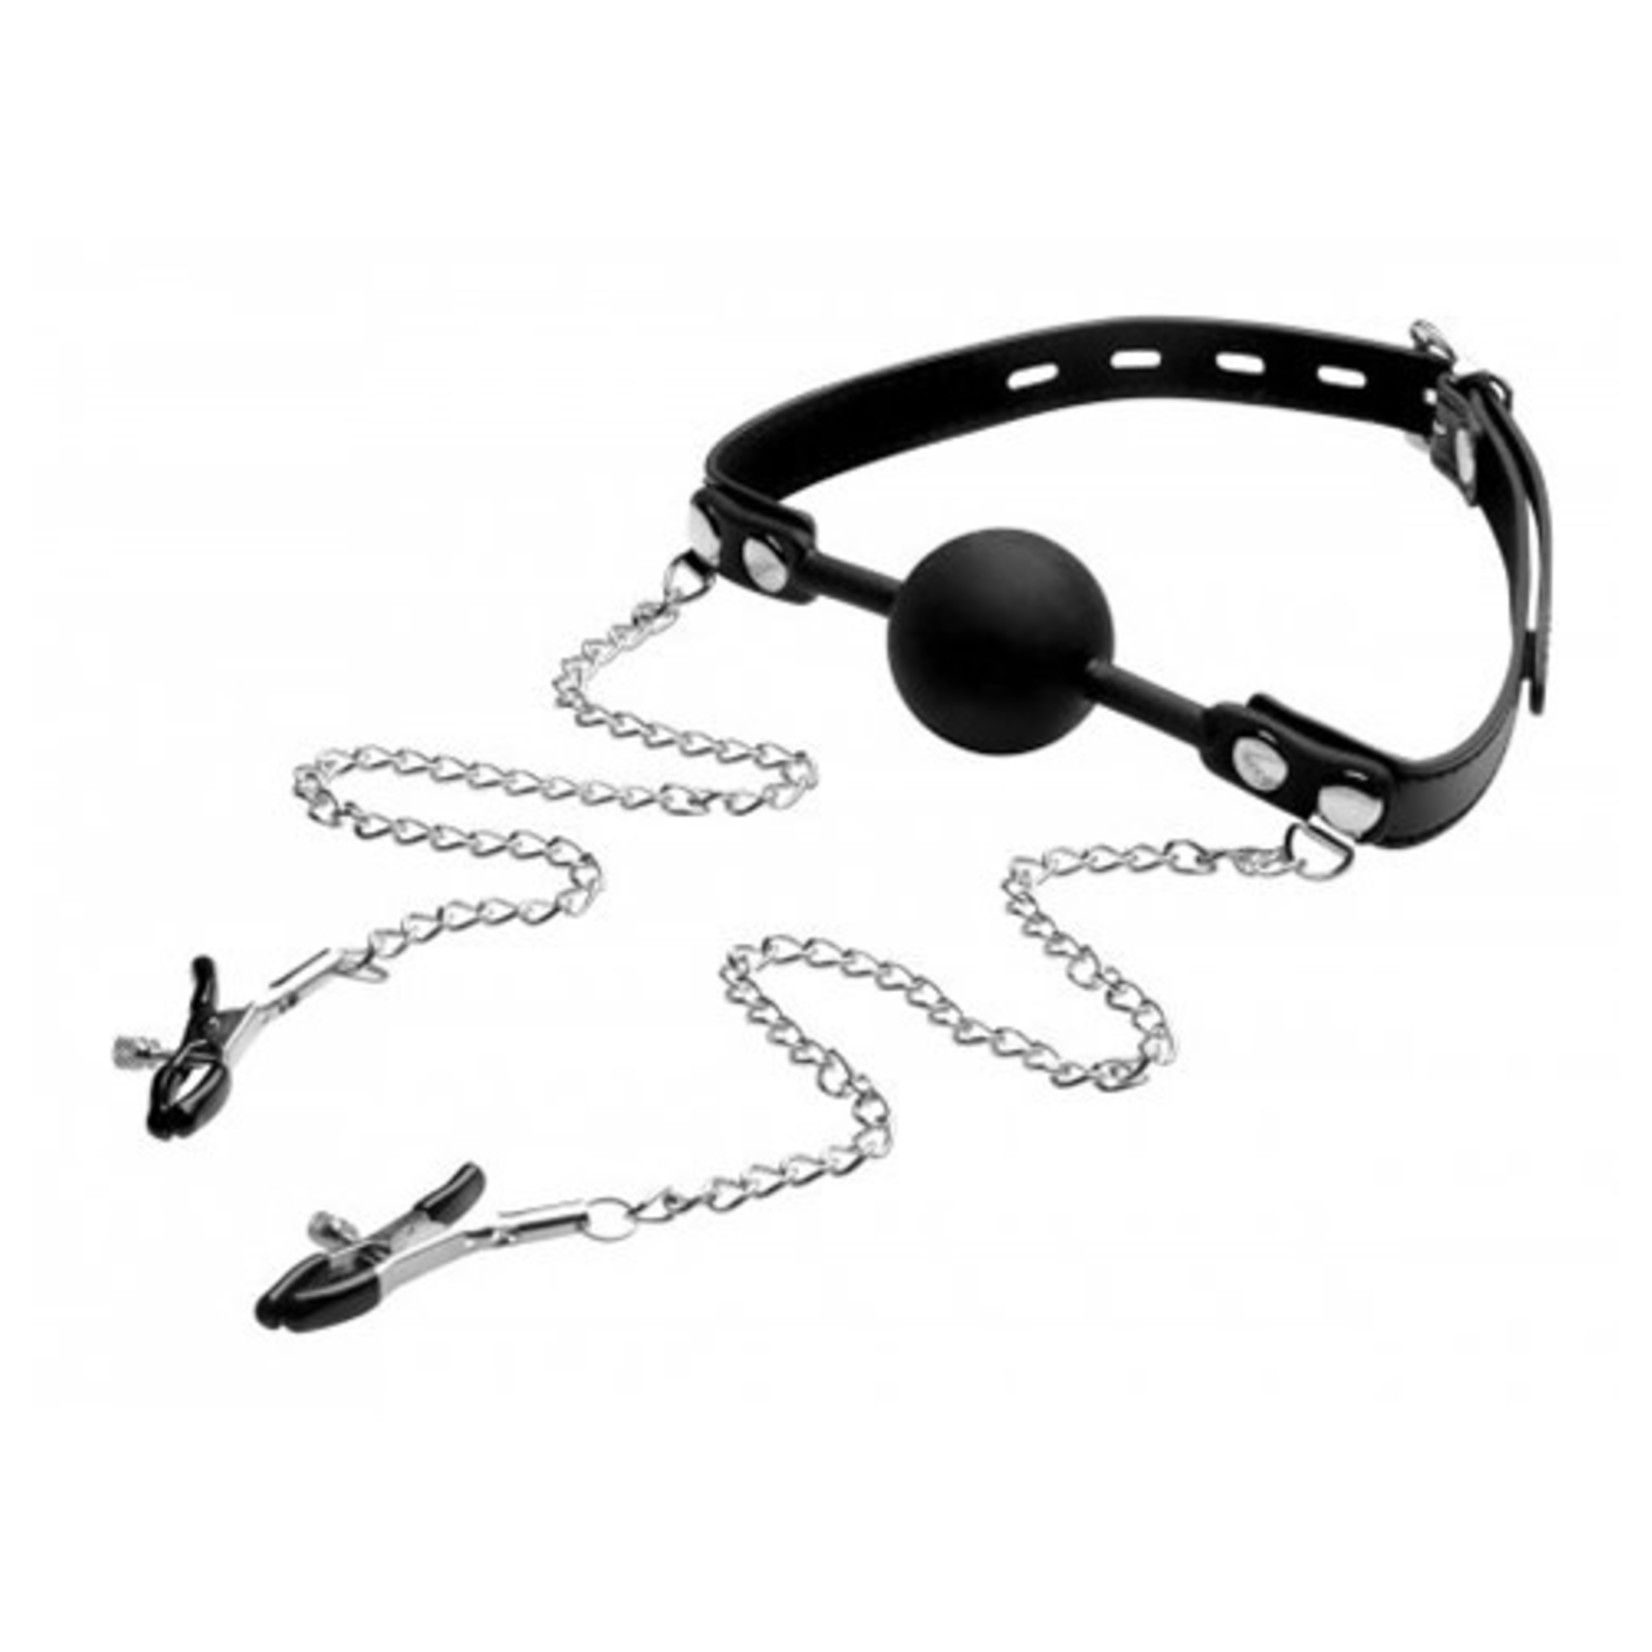 STRICT STRICT - SILICONE BALL GAG WITH NIPPLE CLAMPS